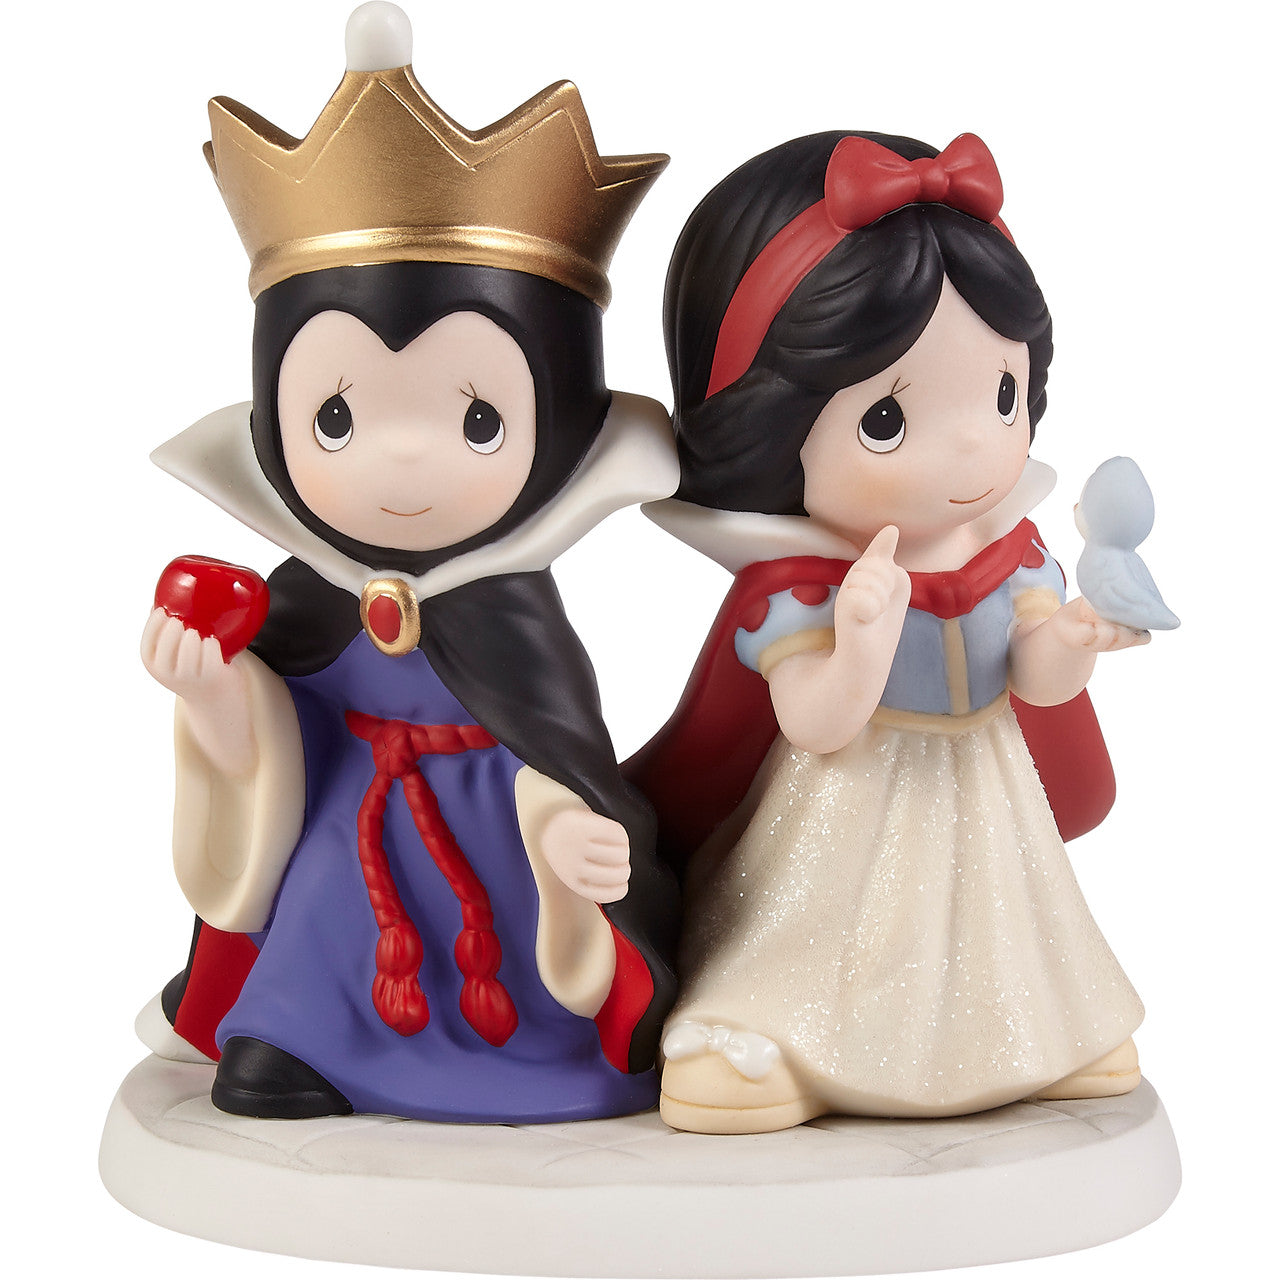 snow white and evil queen figurine